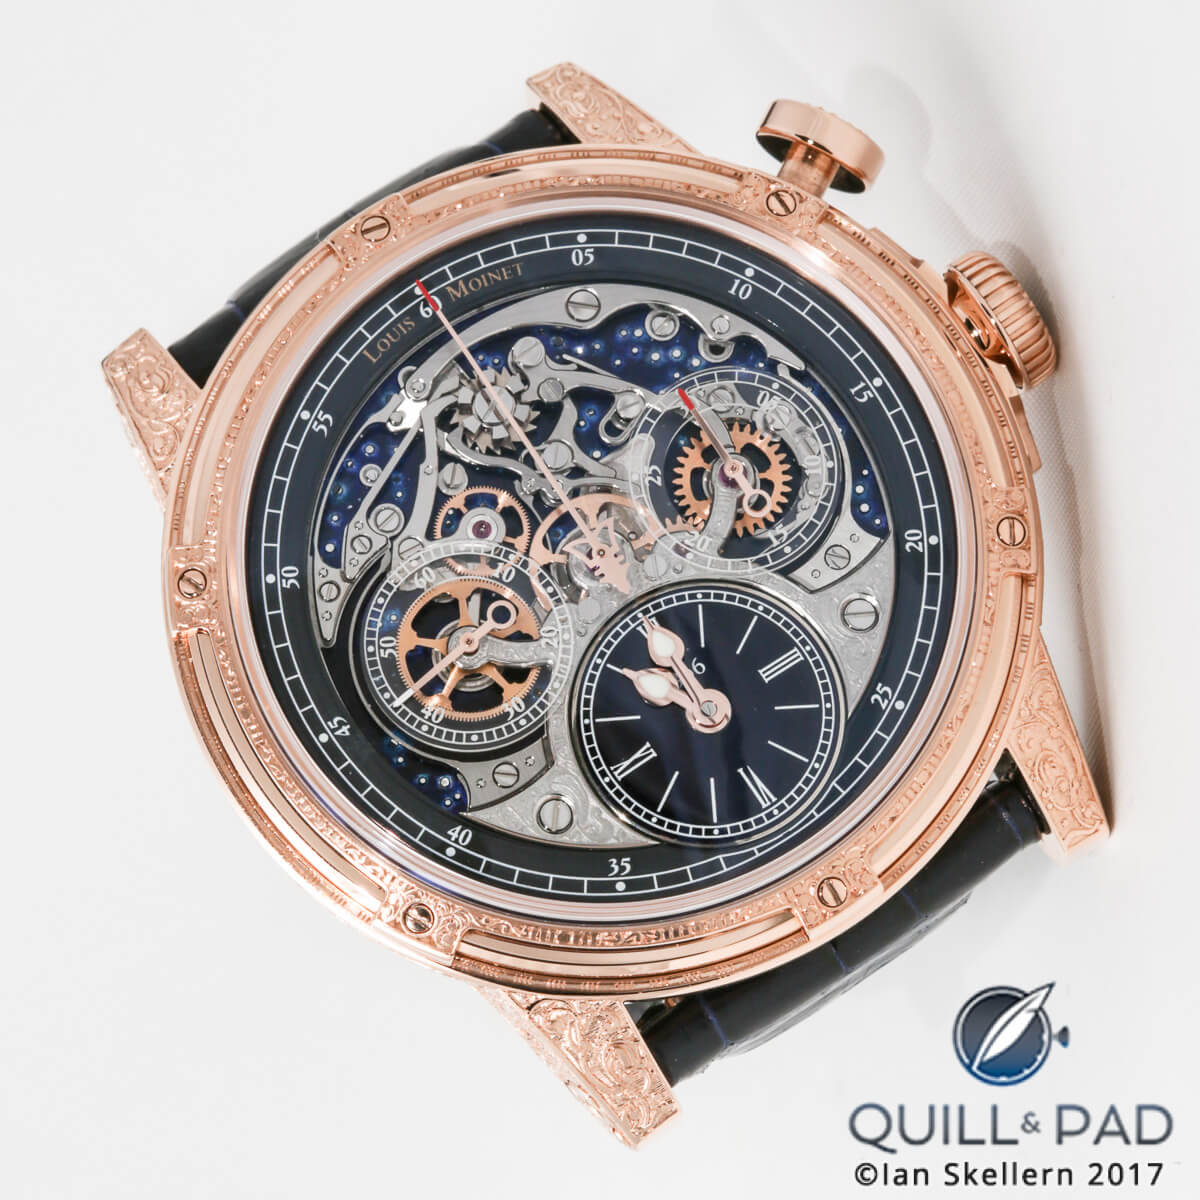 Give Me Five! 5 Fantastic Manufacture Chronographs From Baselworld 